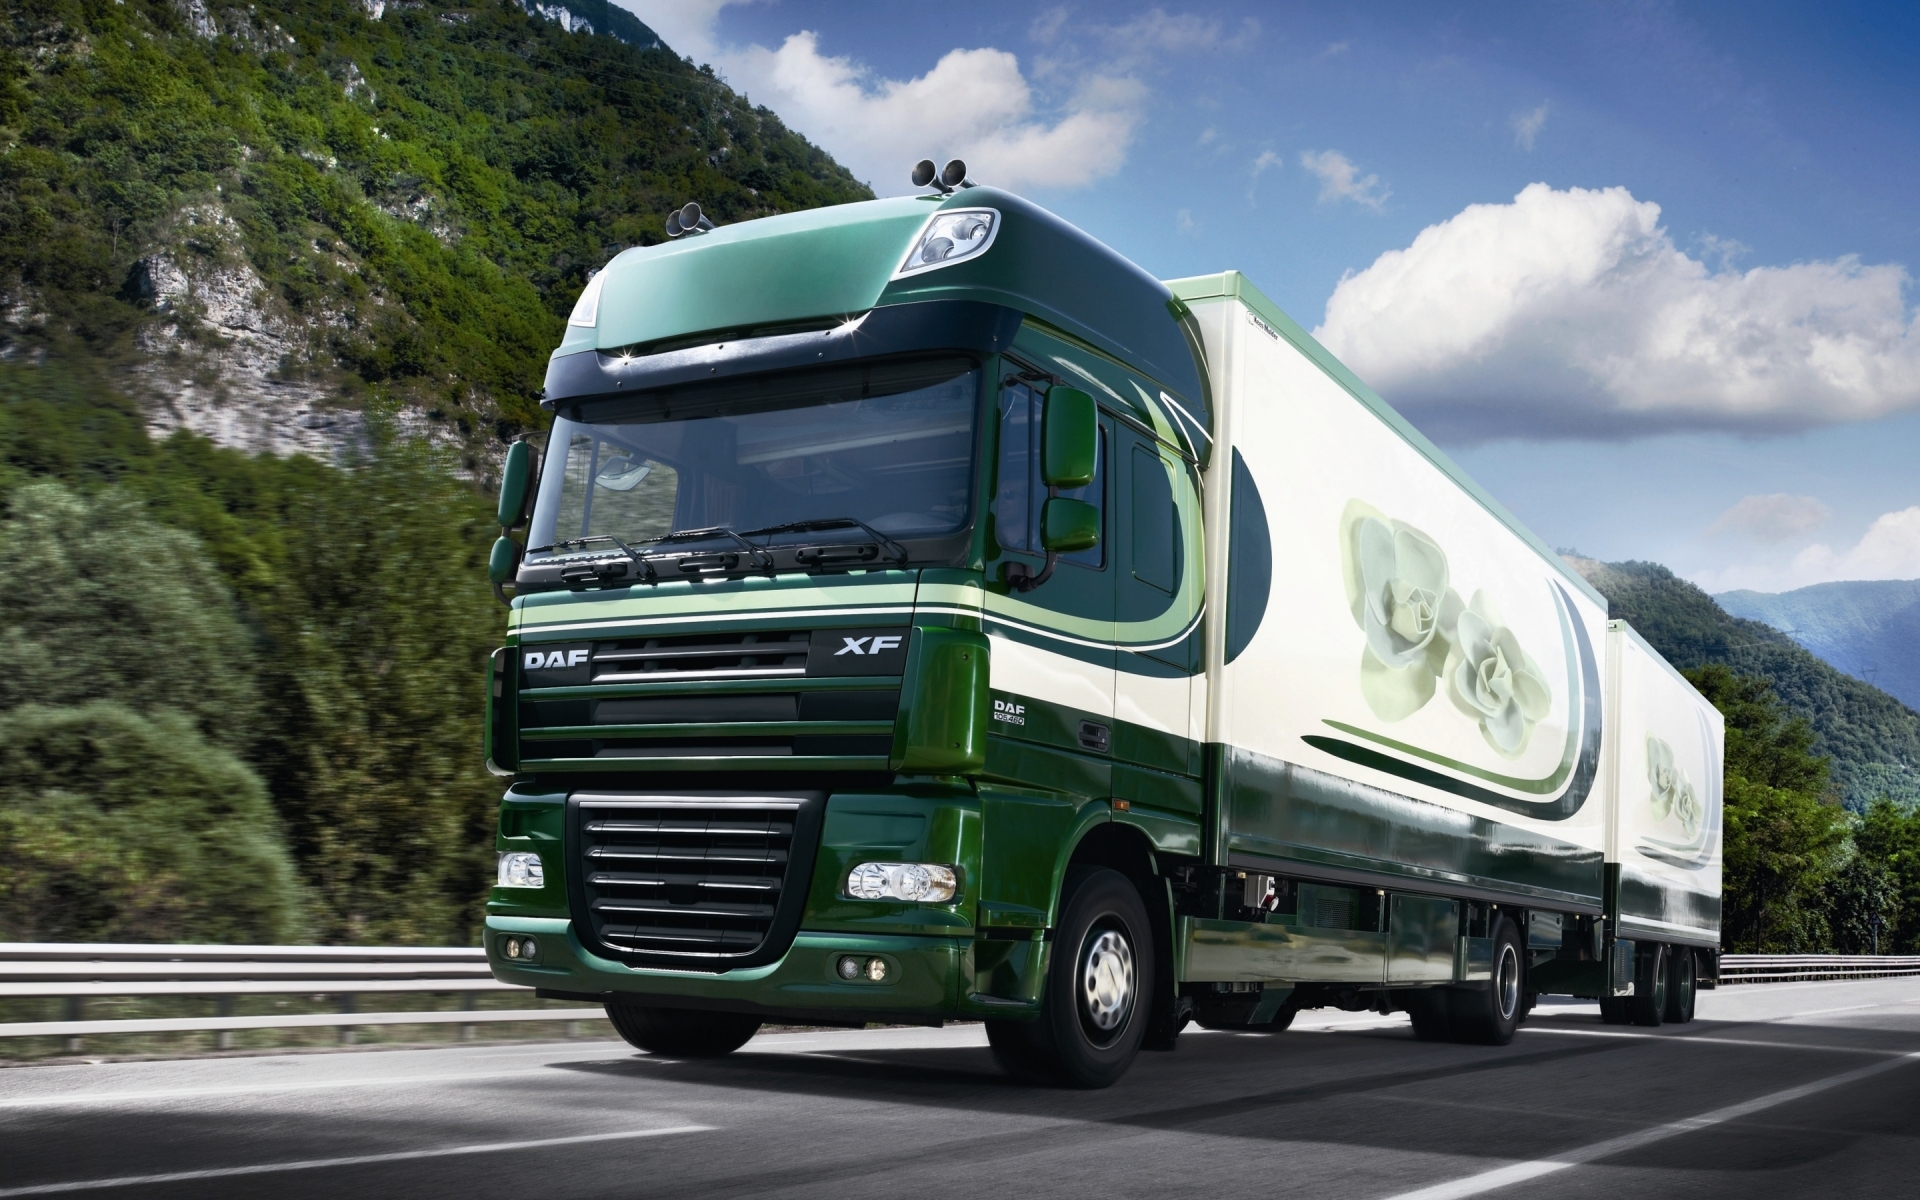 DAF XF 105 Truck for 1920 x 1200 widescreen resolution